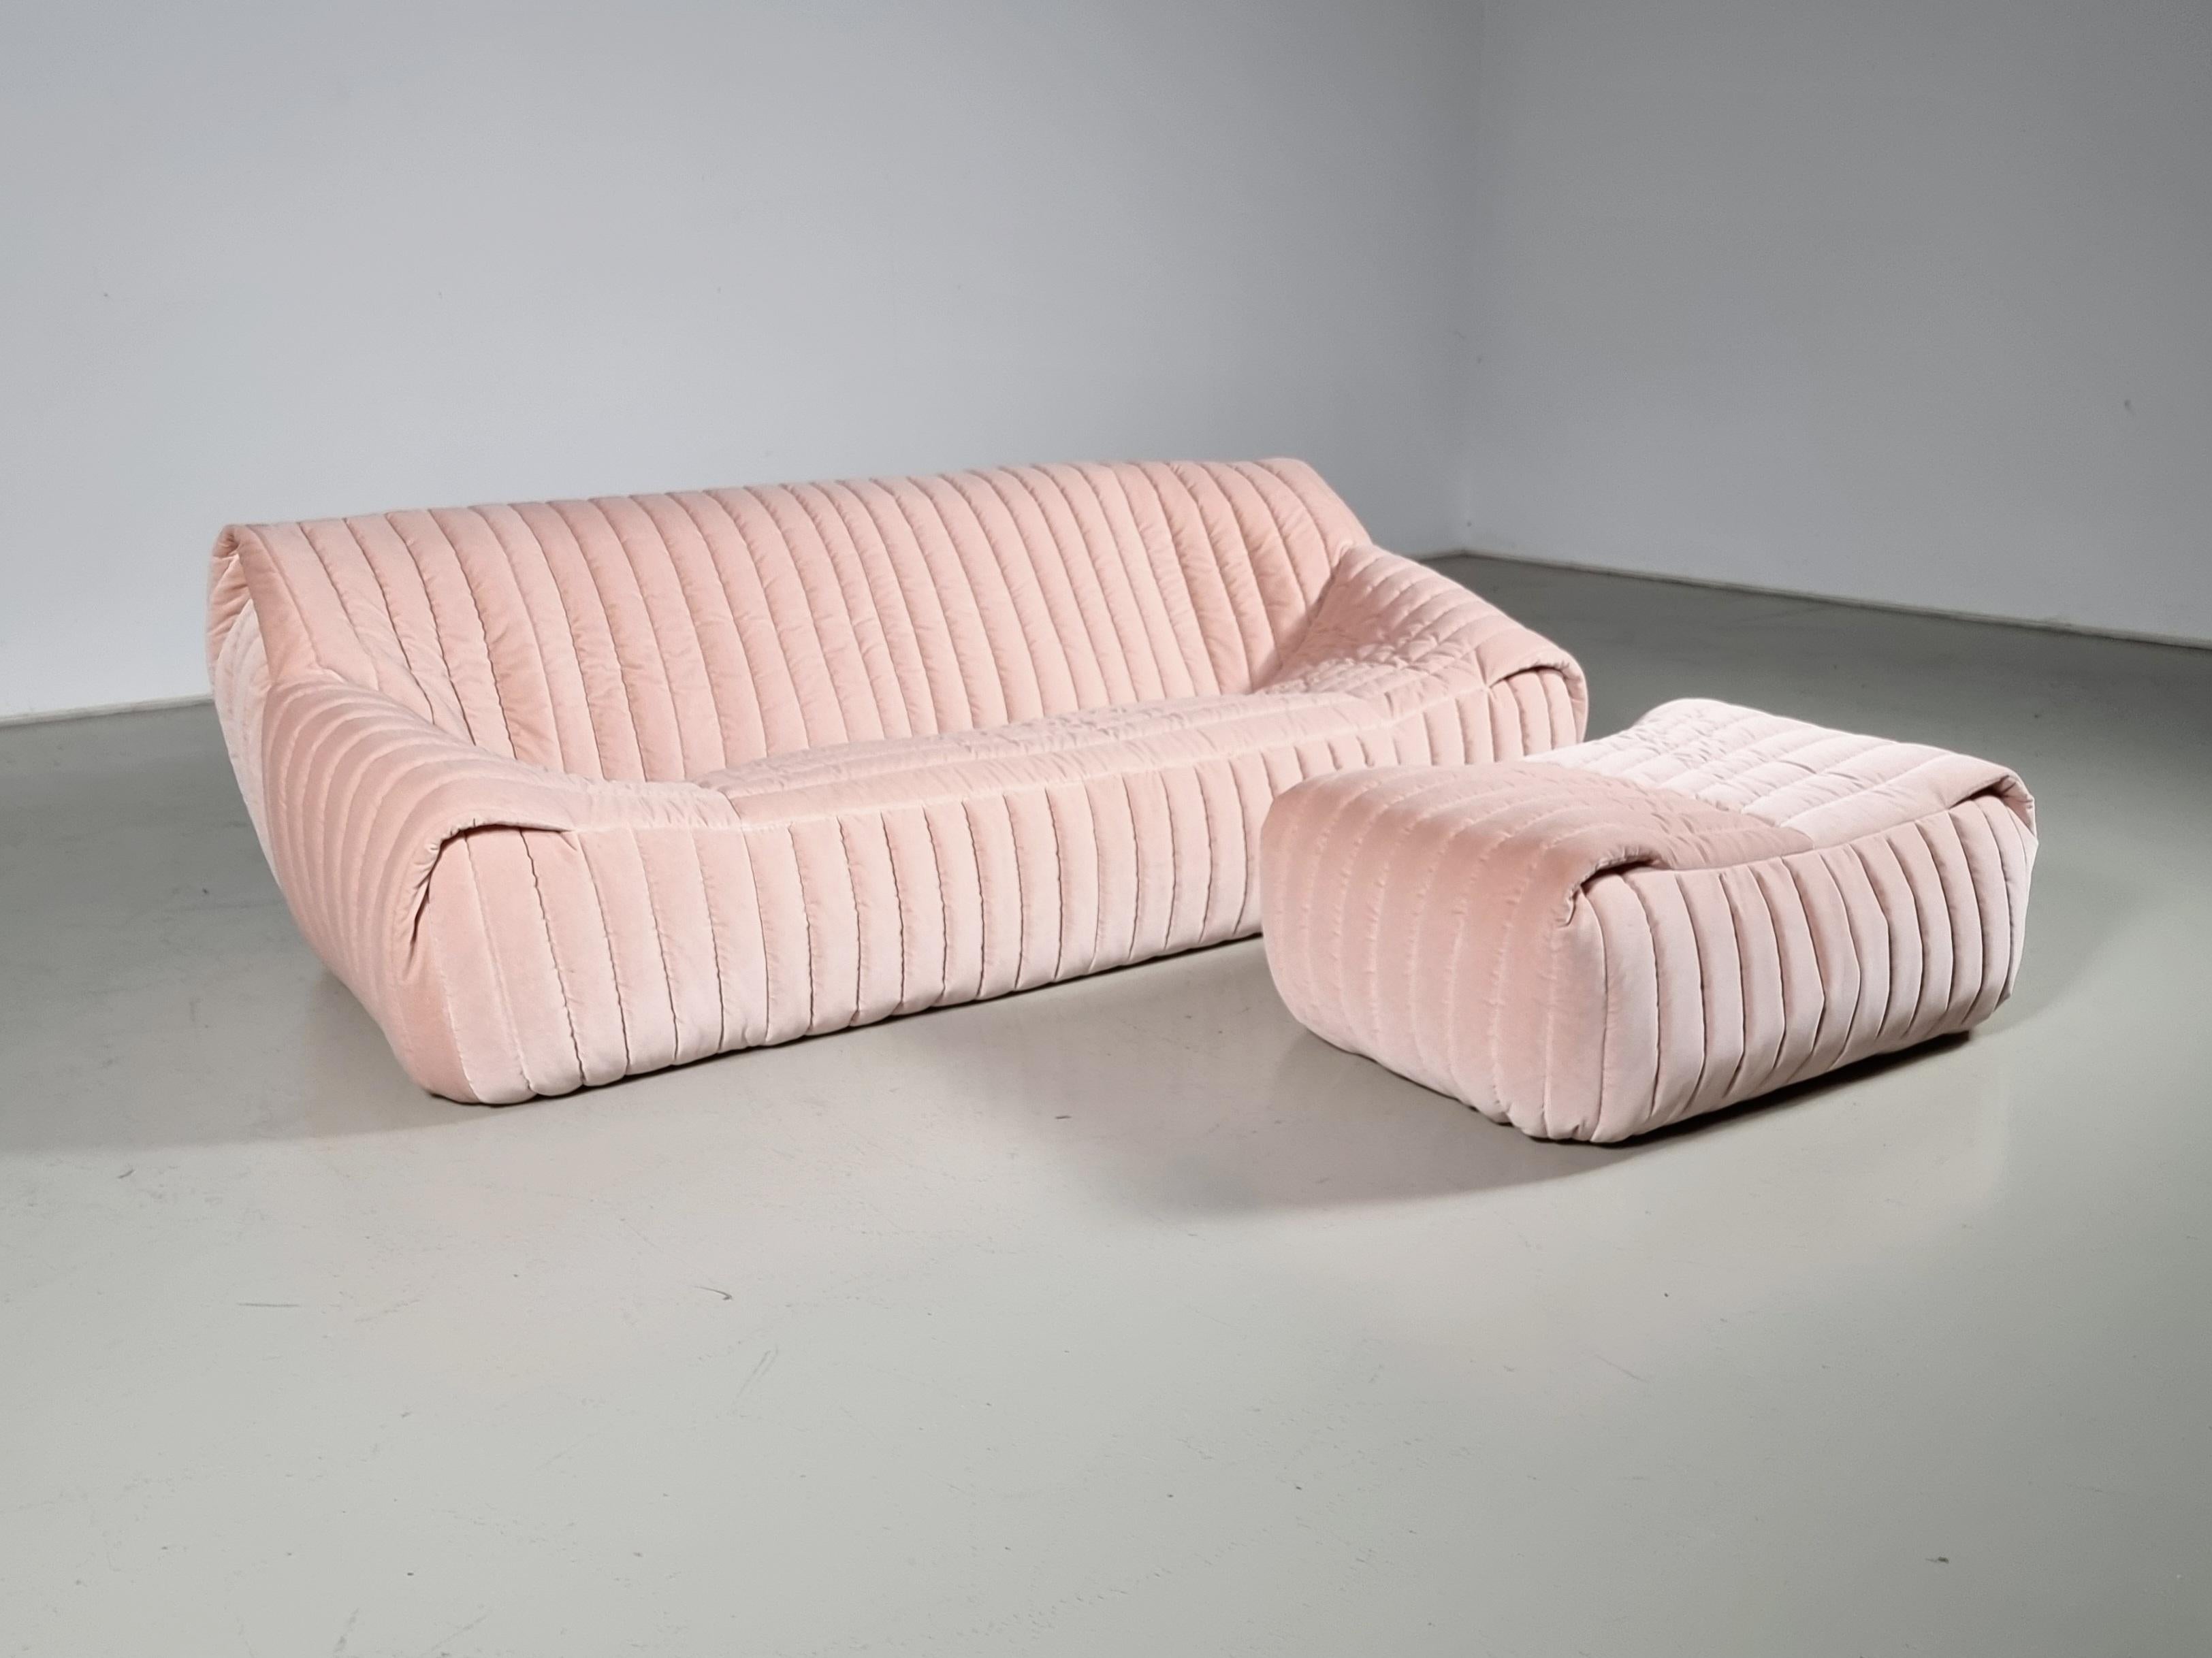 The Sandra sofa was designed by Annie Hiéronimus for Cinna after she joined the Roset Bureau d'Etudes in 1976. 

Constructed fully from foam, the sofa has a solid form. The lines enhance the soft curves of the sofa and the folds of the fabric,